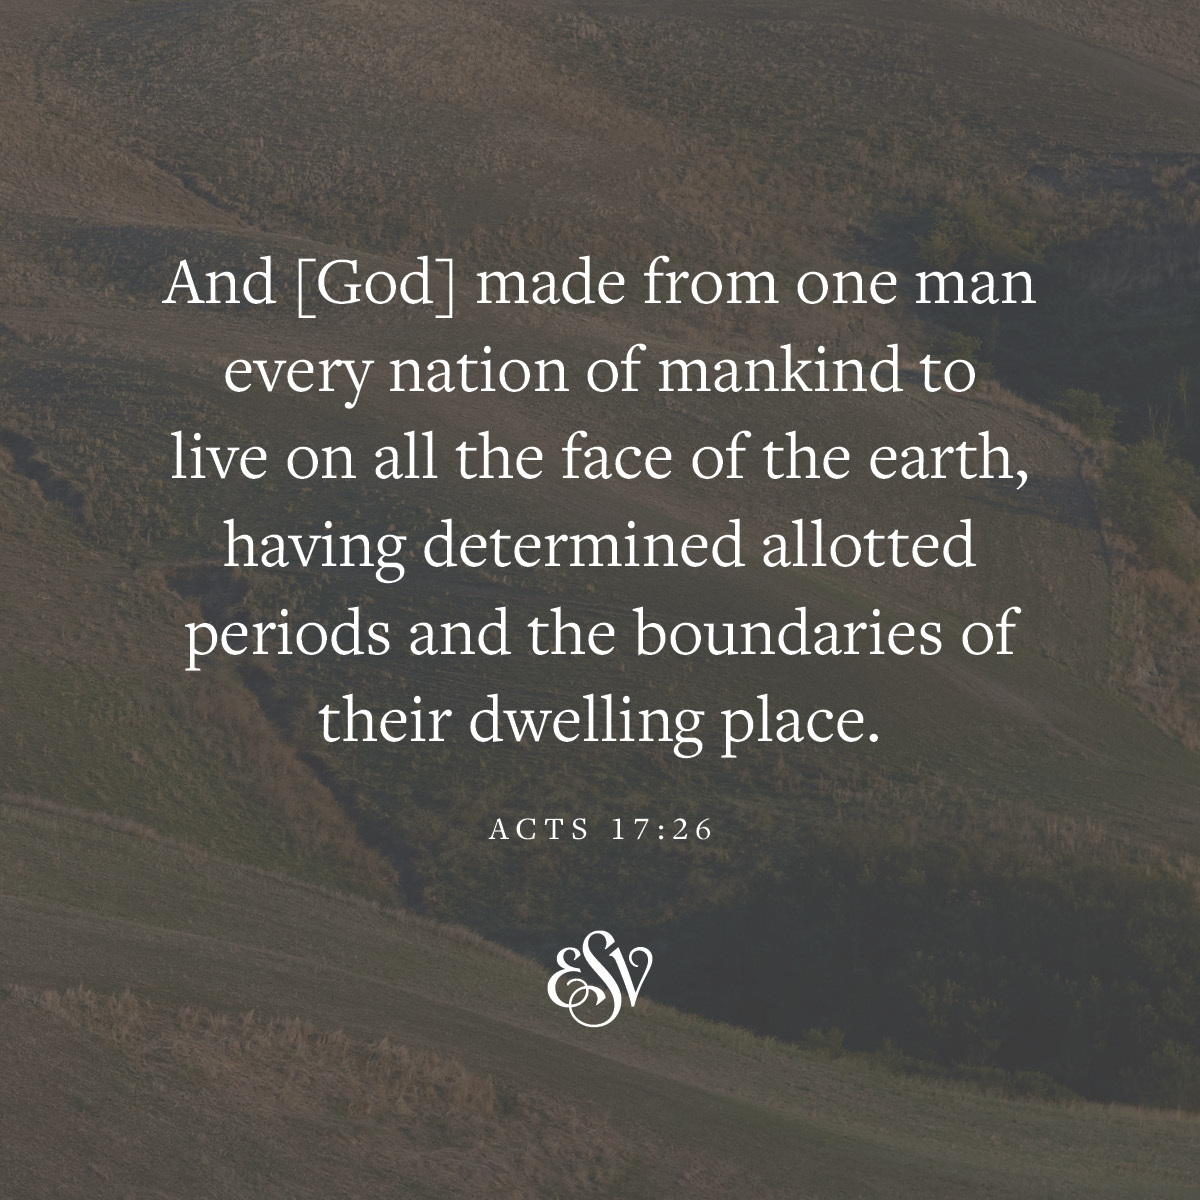 And [God] made from one man every nation of mankind to live on all the face of the earth, having determined allotted periods and the boundaries of their dwelling place. 
—Acts 17:26 ESV.org

#Verseoftheday #ESV #Scripturememoryverse #Bible